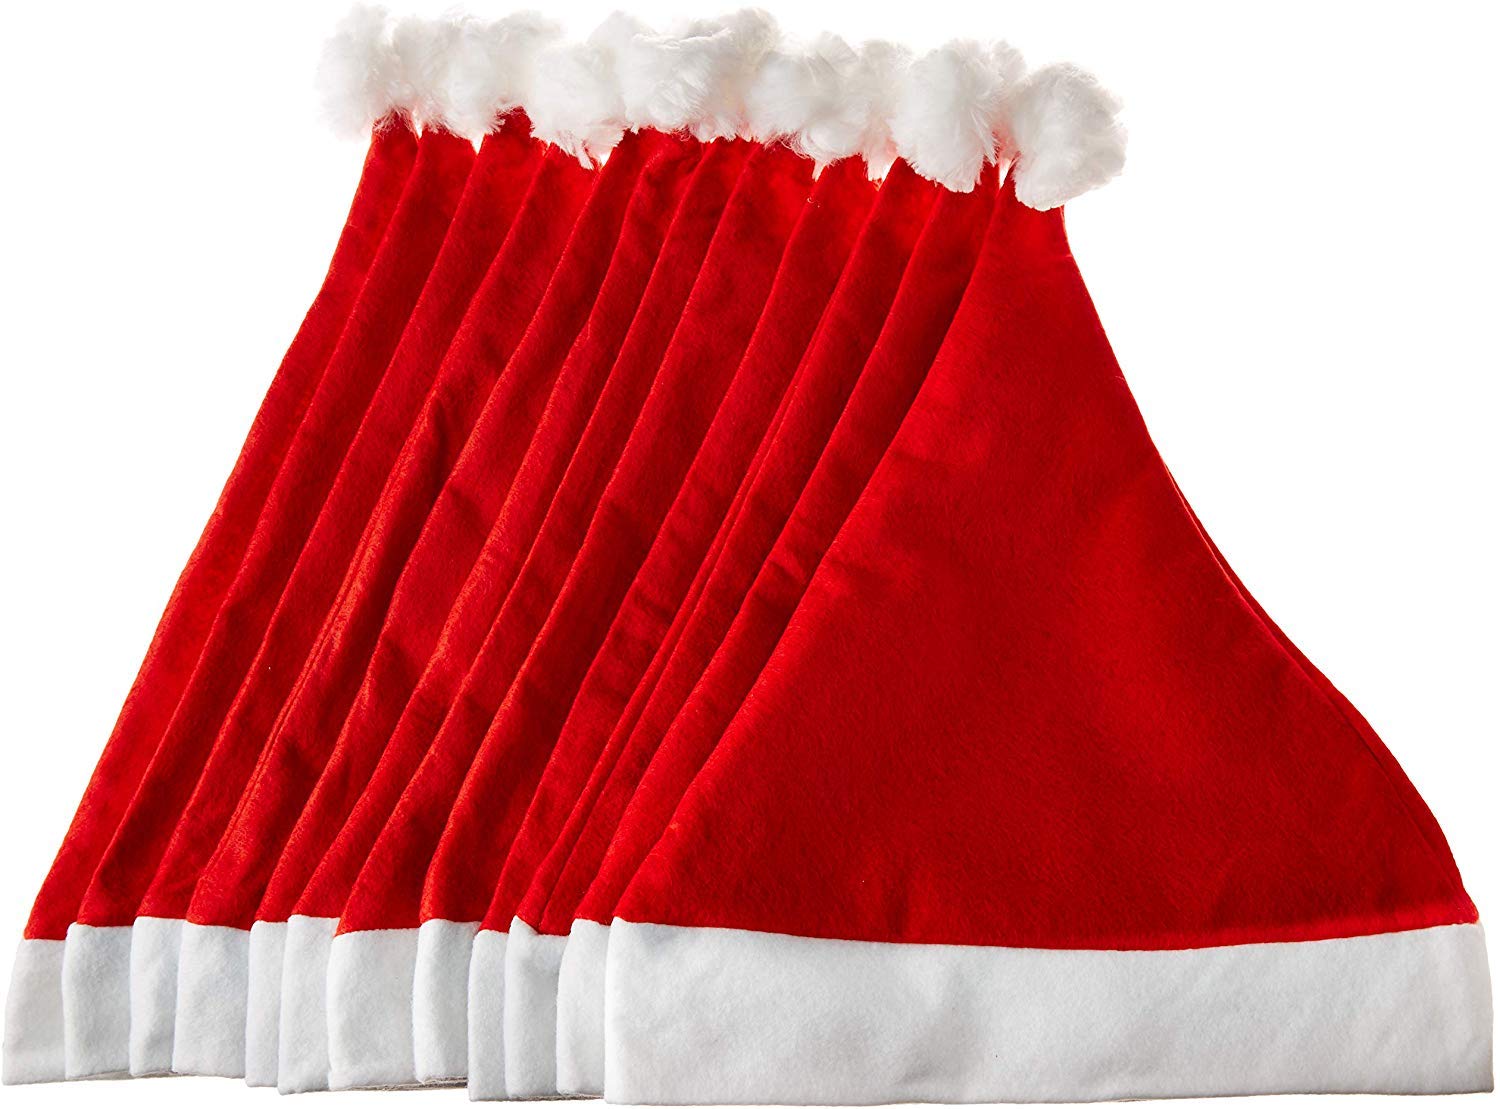 eCraftIndia Red and White Merry Christmas Hats, Santa Claus Caps for kids and Adults - Free Size XMAS Caps, Santa Claus Hats for Christmas, New Year, Festive Holiday Party (Set of 30) 4